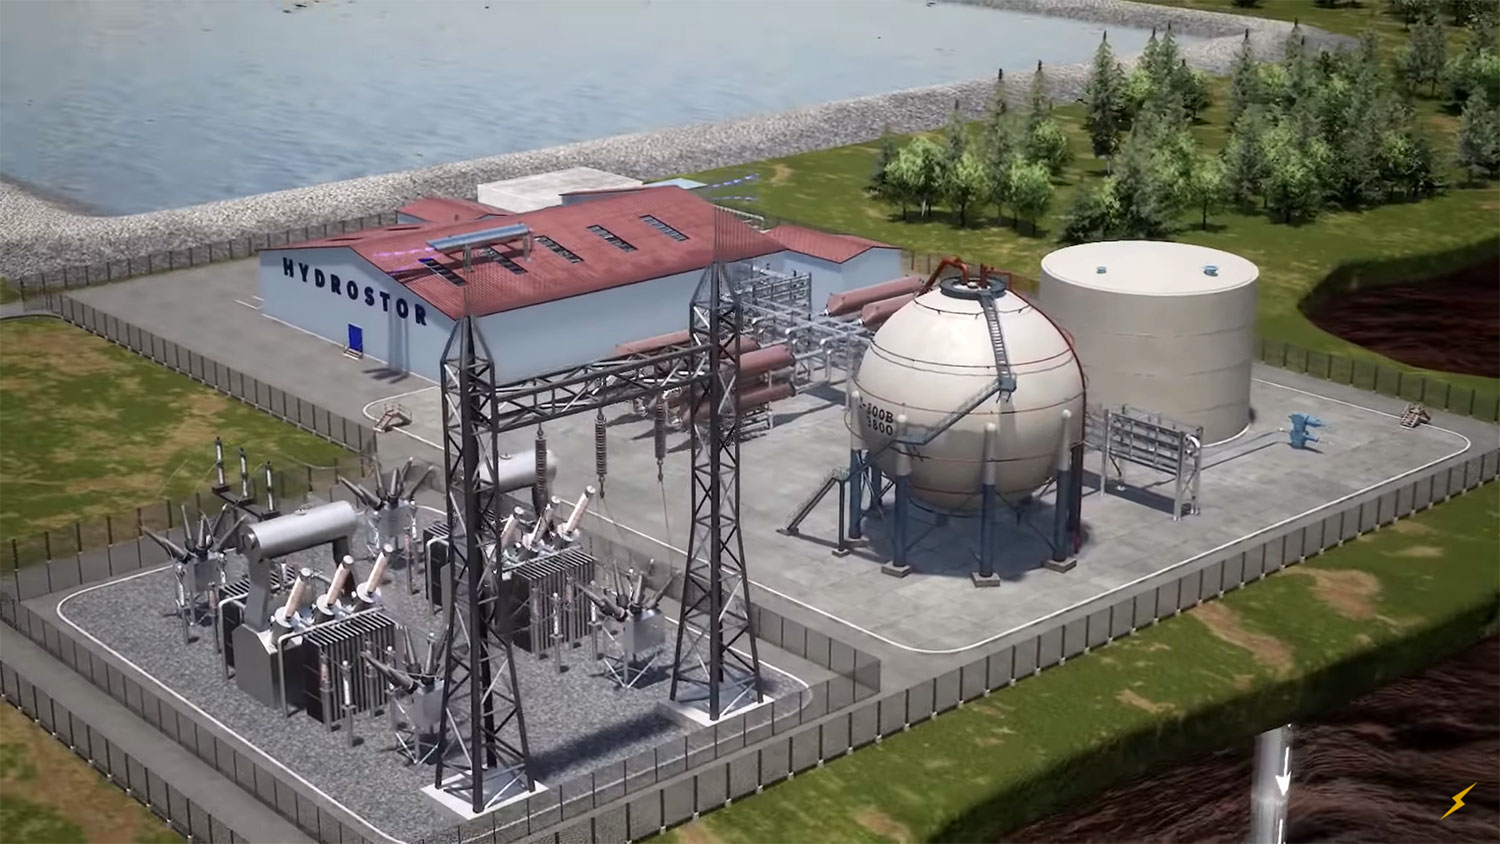 Hydrostor to build the largest compressed air energy storage system in California.